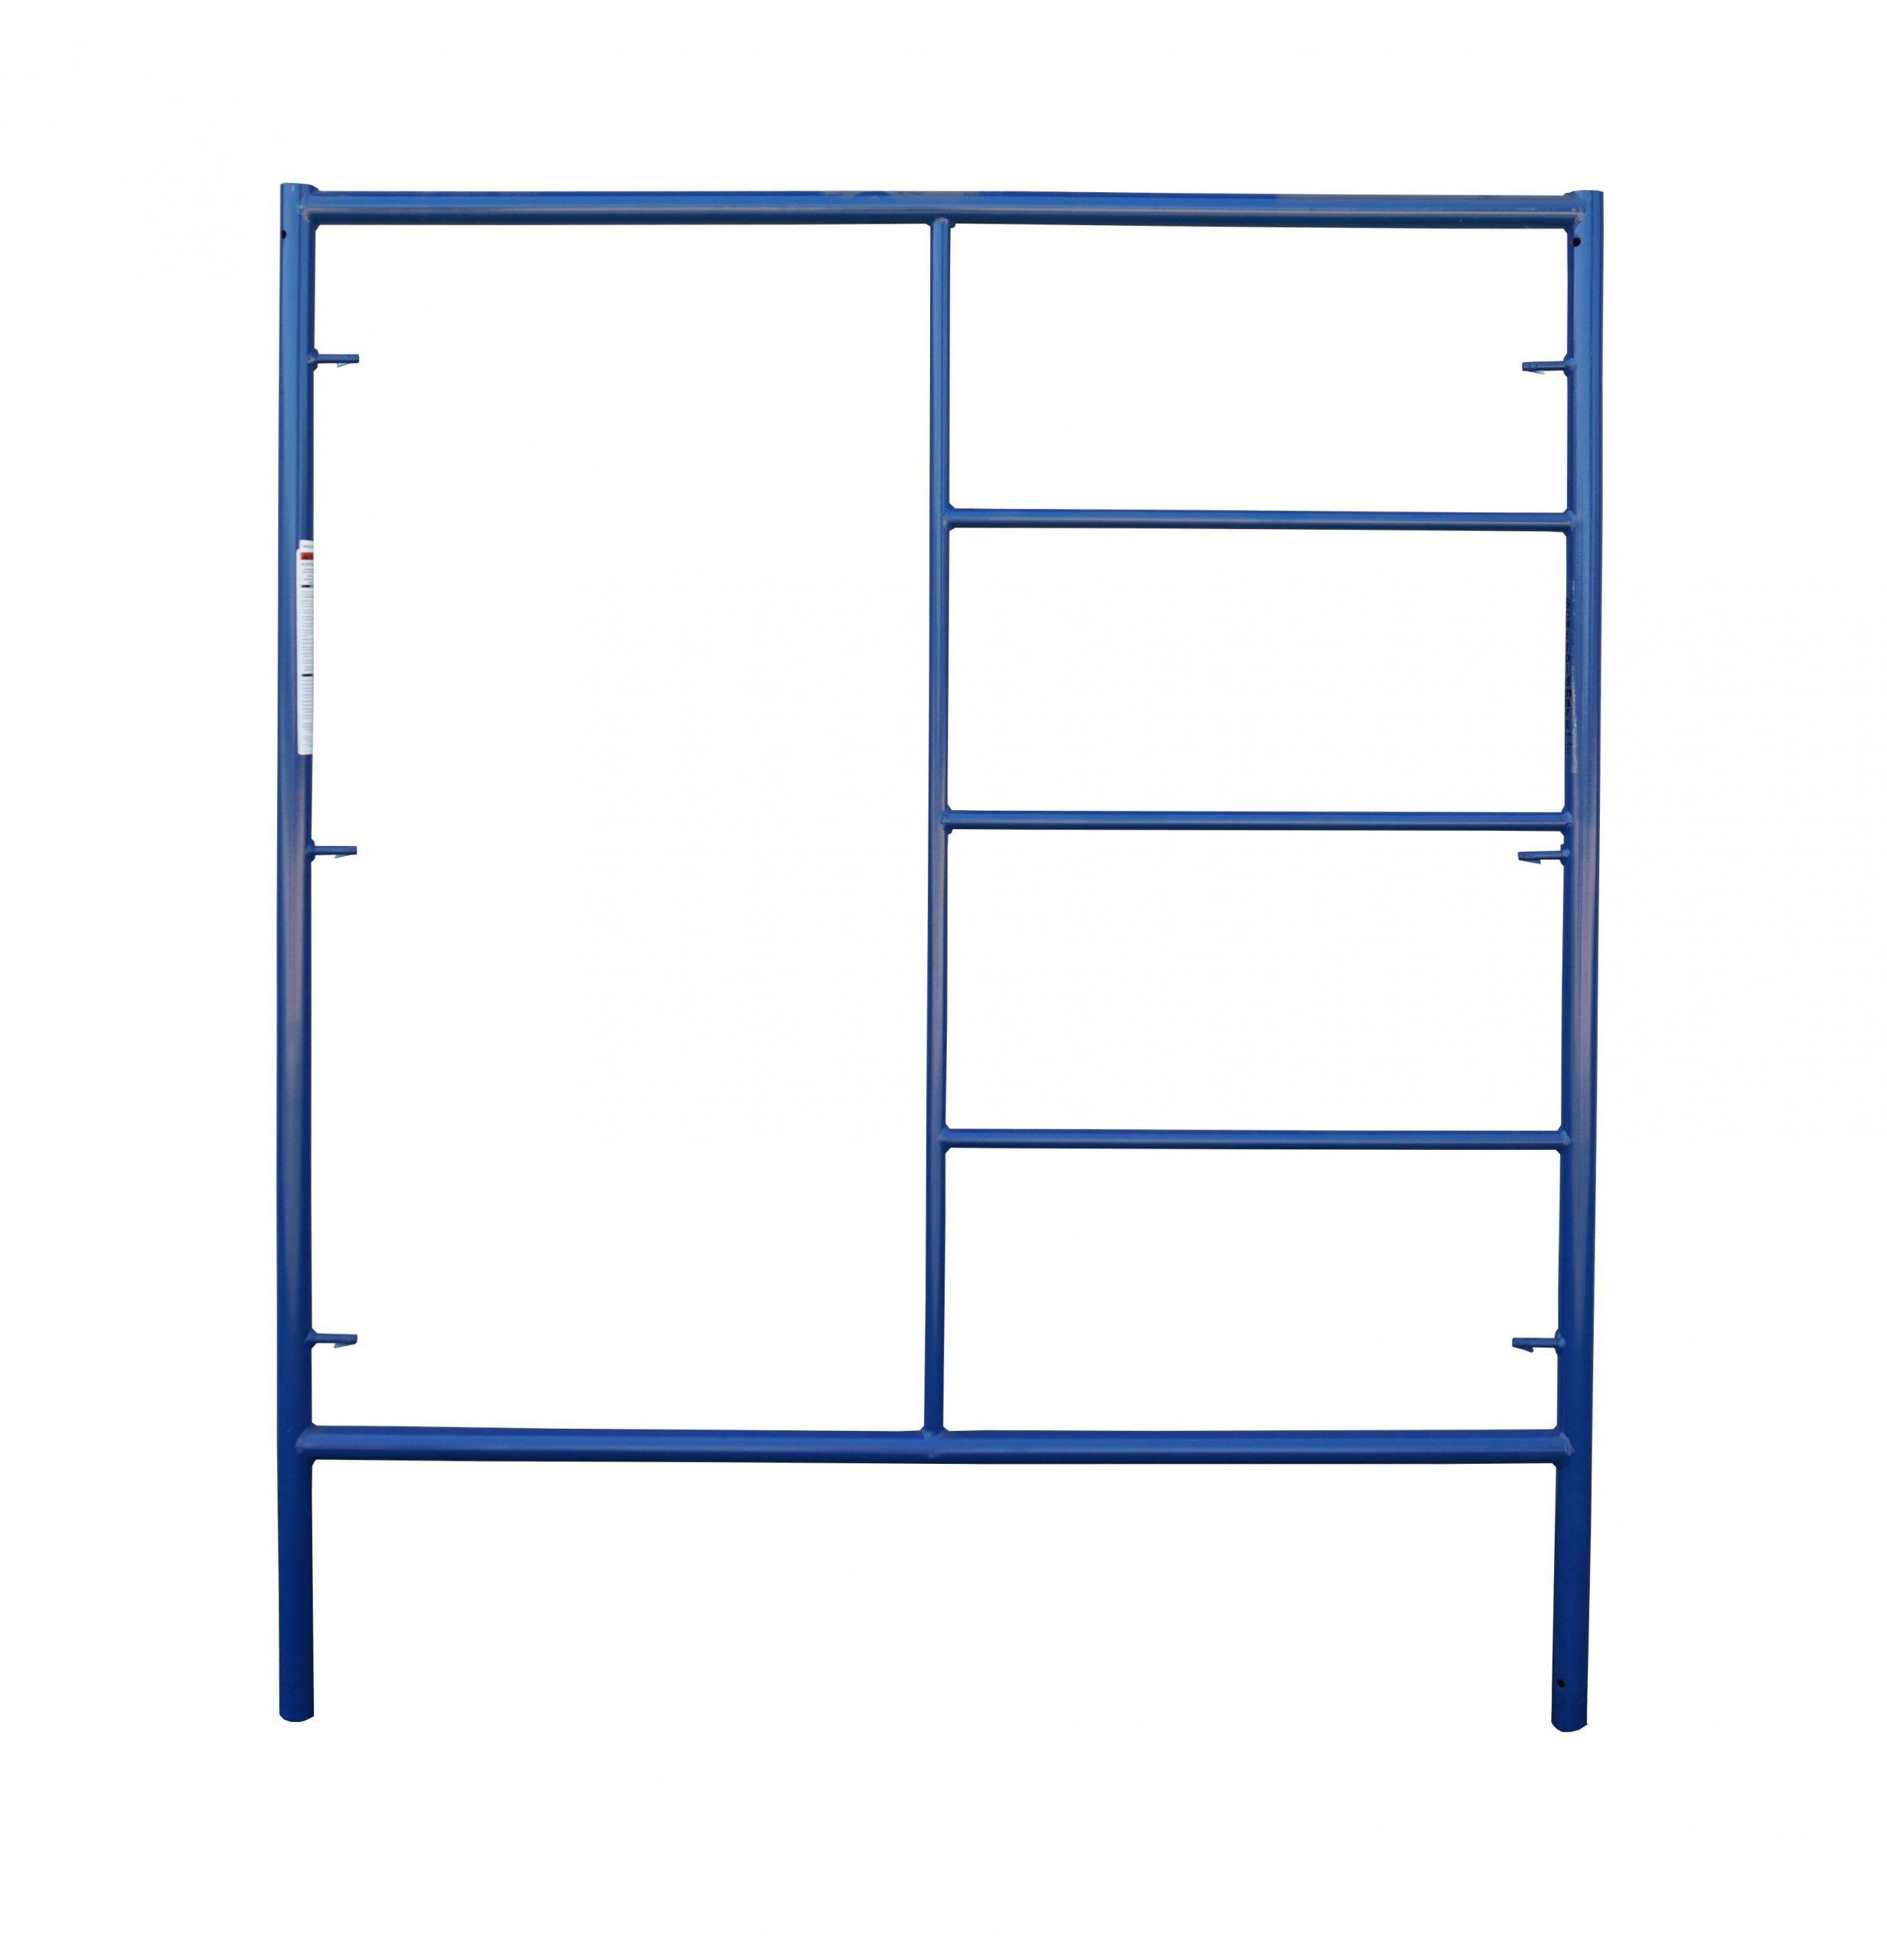 Safway-Style 5' X 6'4" Scaffold Ladder Frame